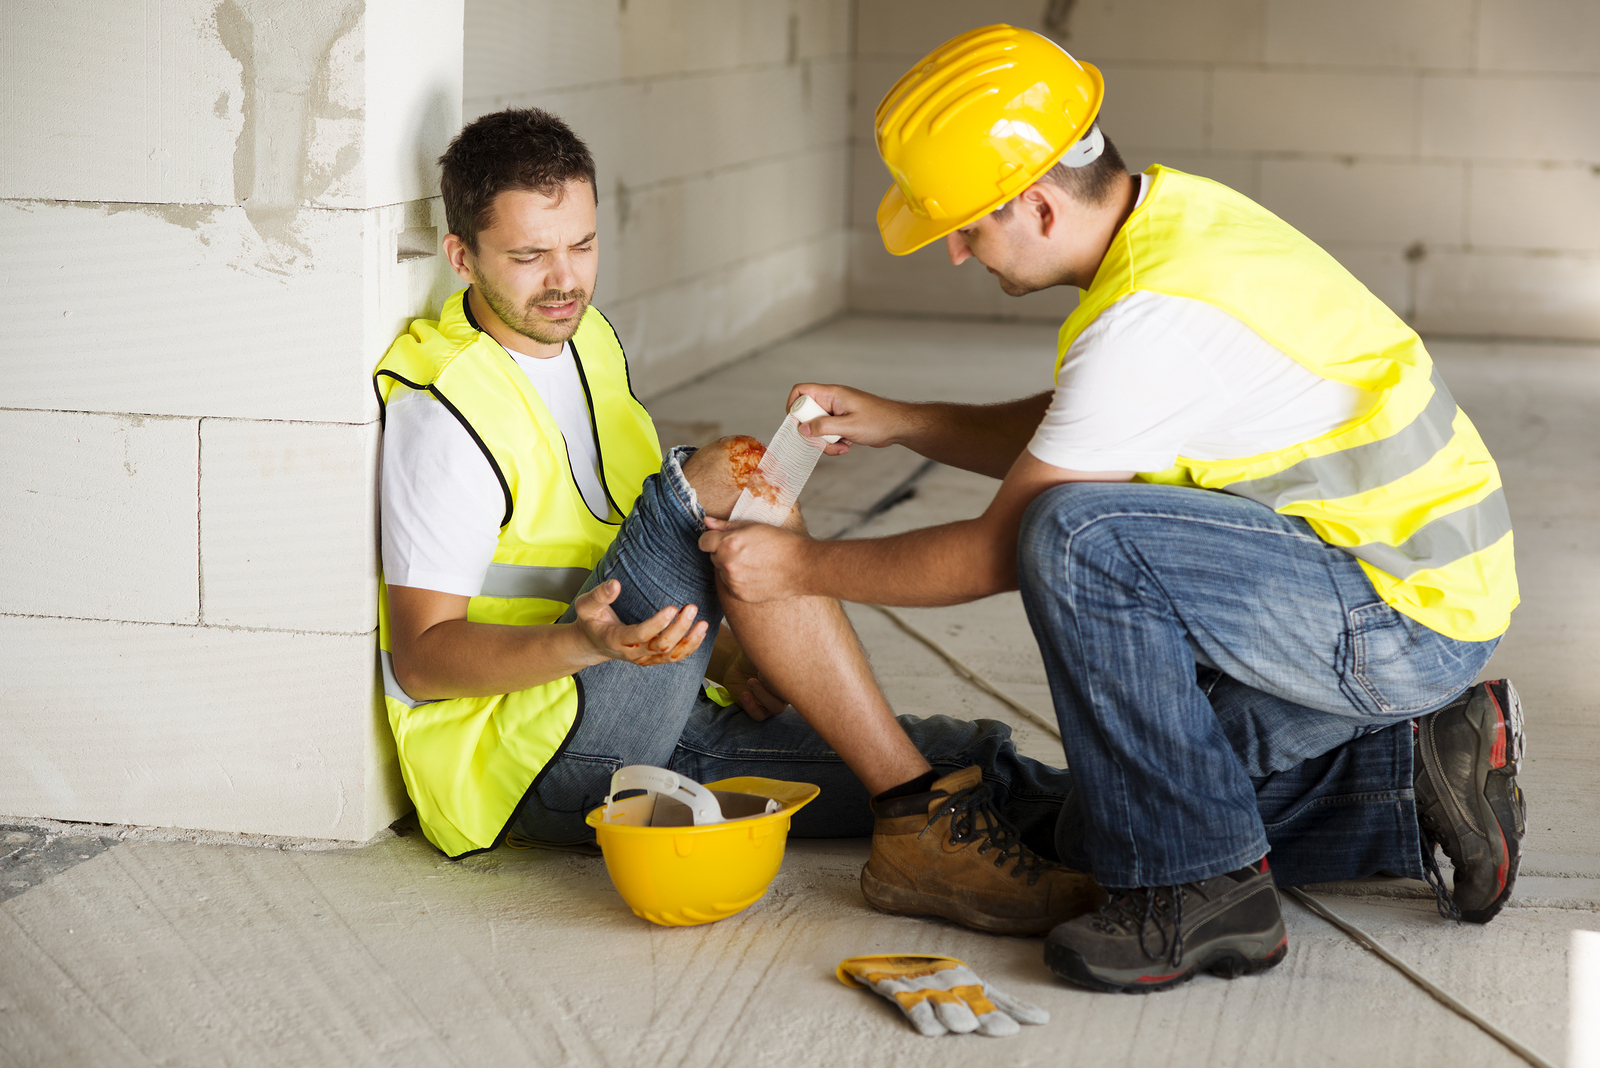 Construction Accident Claims: What Evidence Do You Need for a Strong Case?